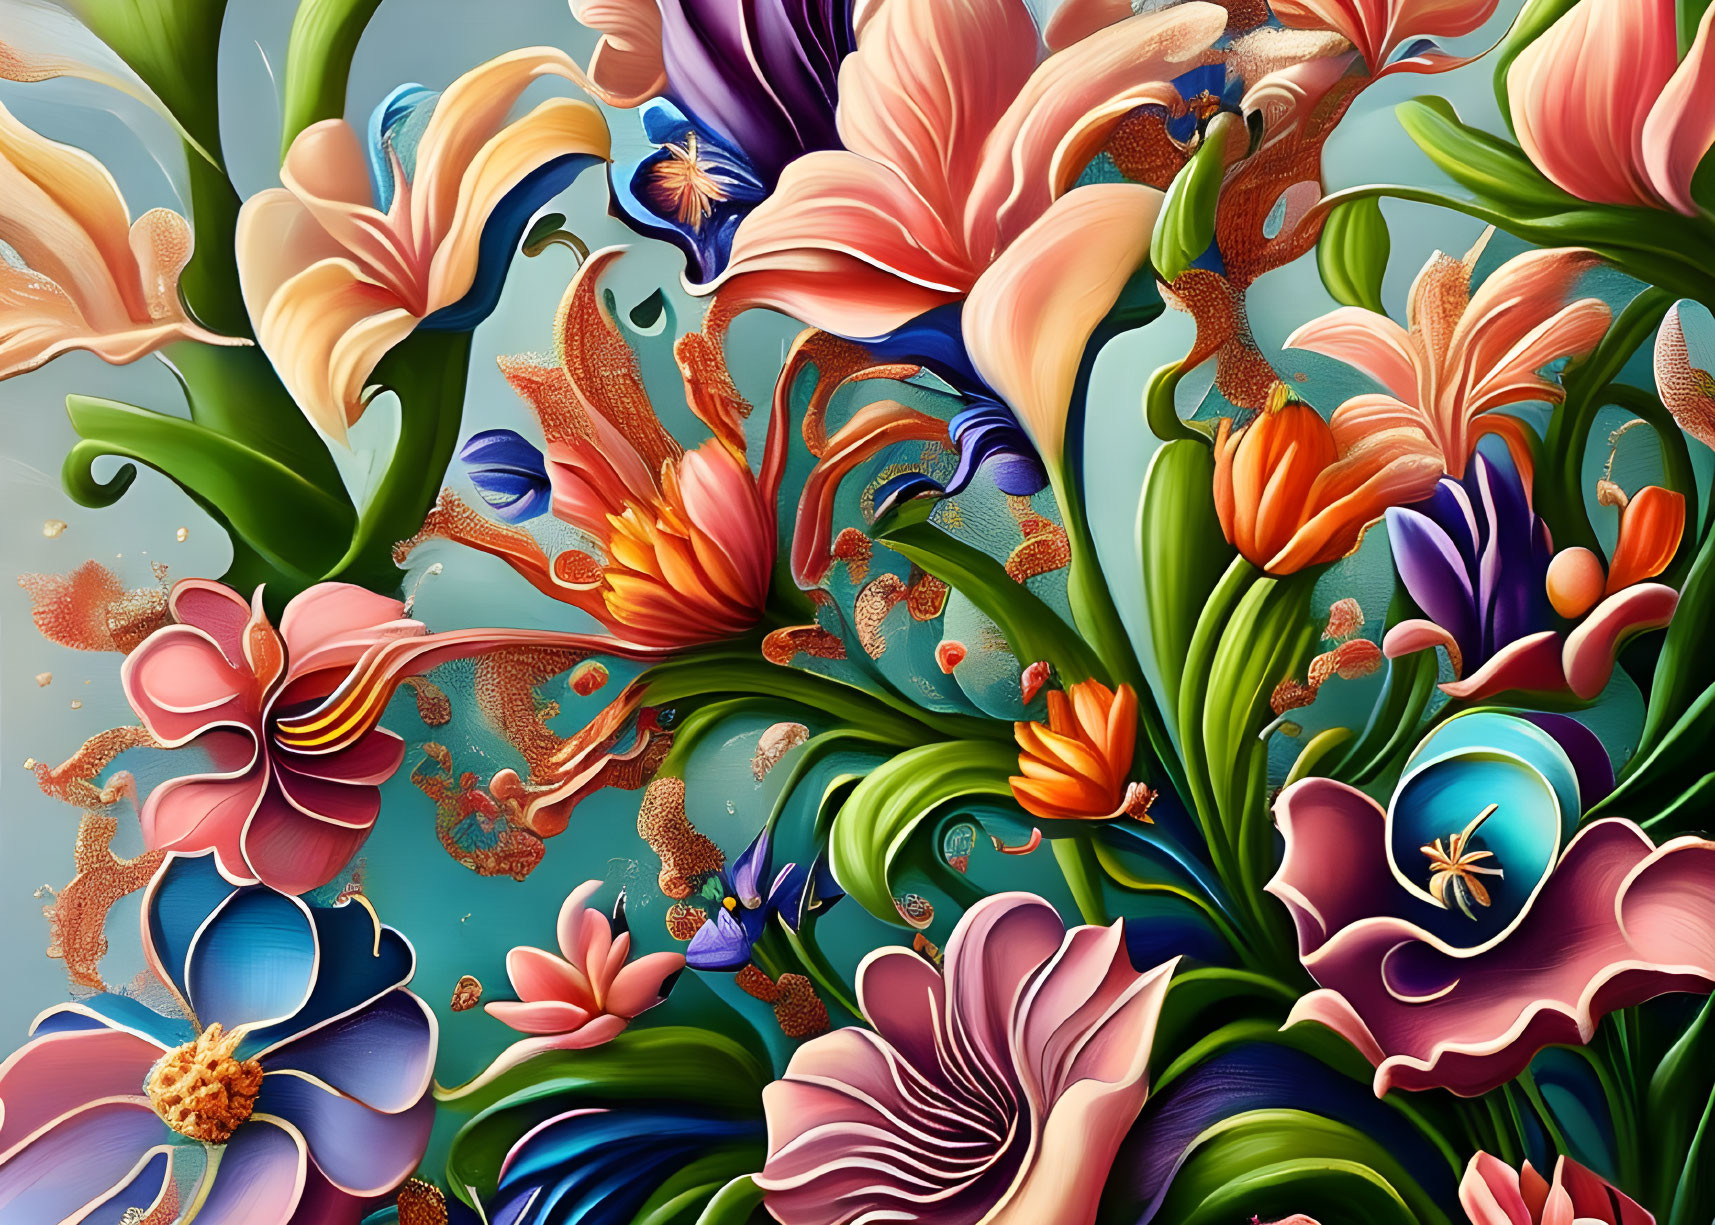 Colorful Stylized Flower Artwork on Textured Background